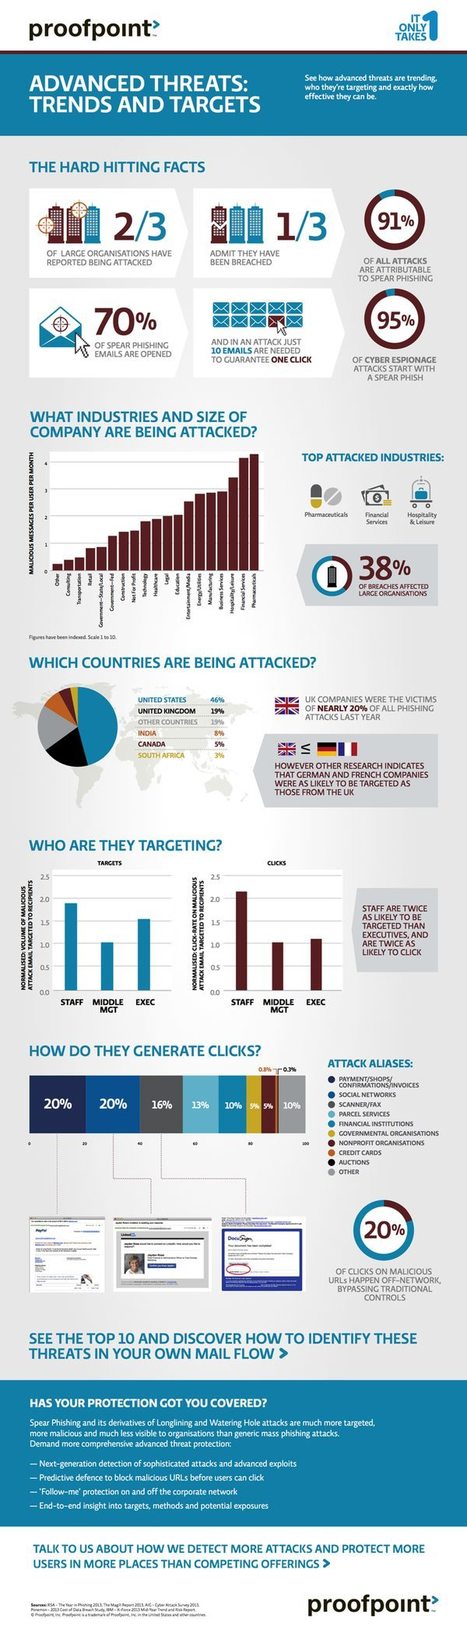 Targeted attacks explored in Proofpoint infographic | 21st Century Learning and Teaching | Scoop.it